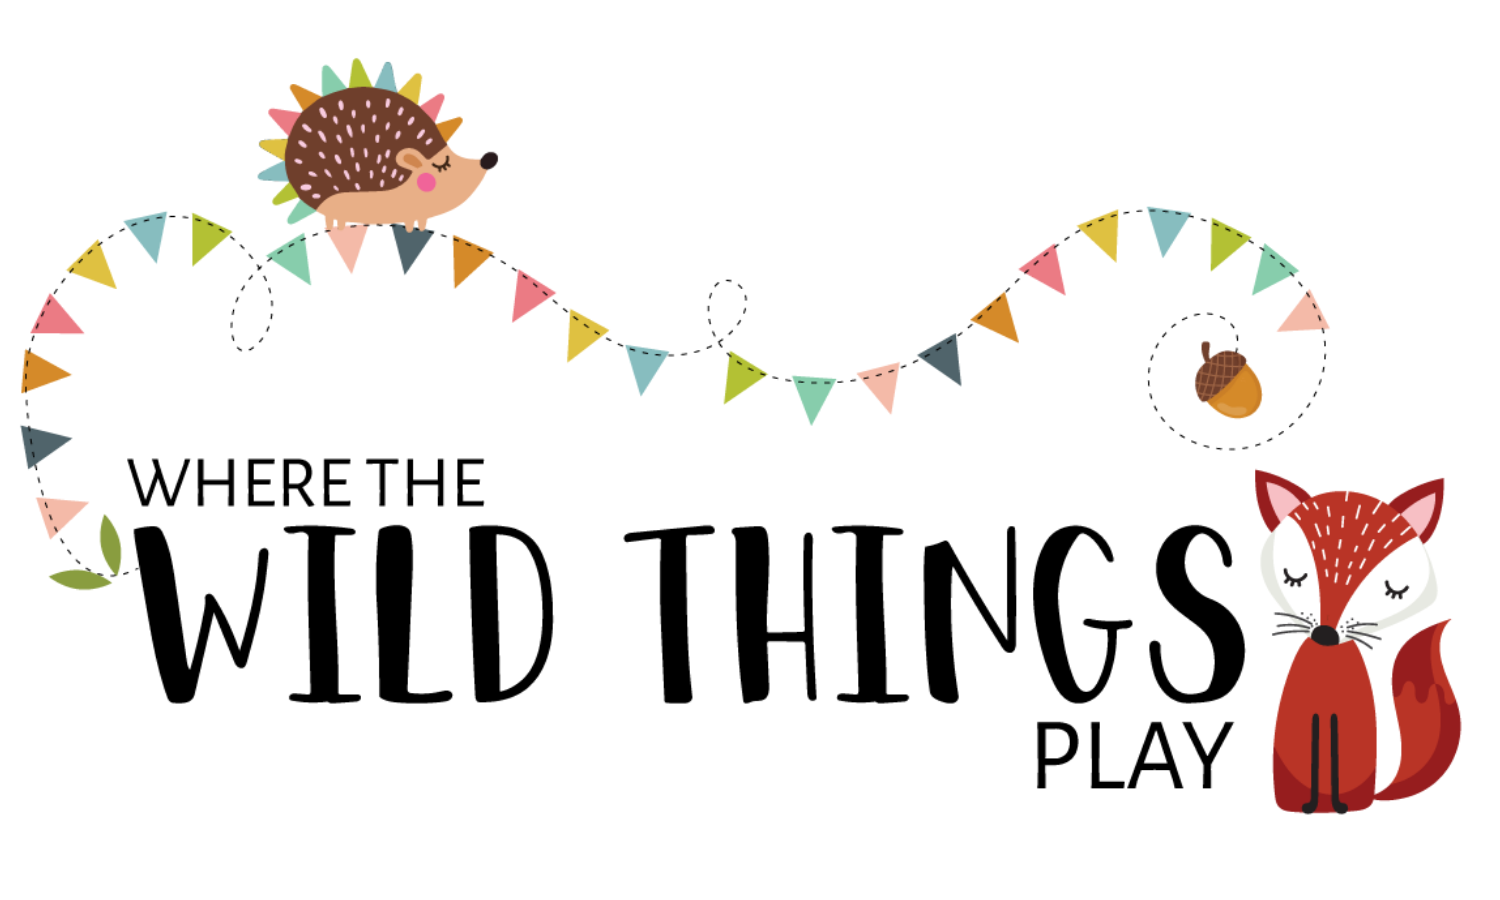 Where the Wild Things Play